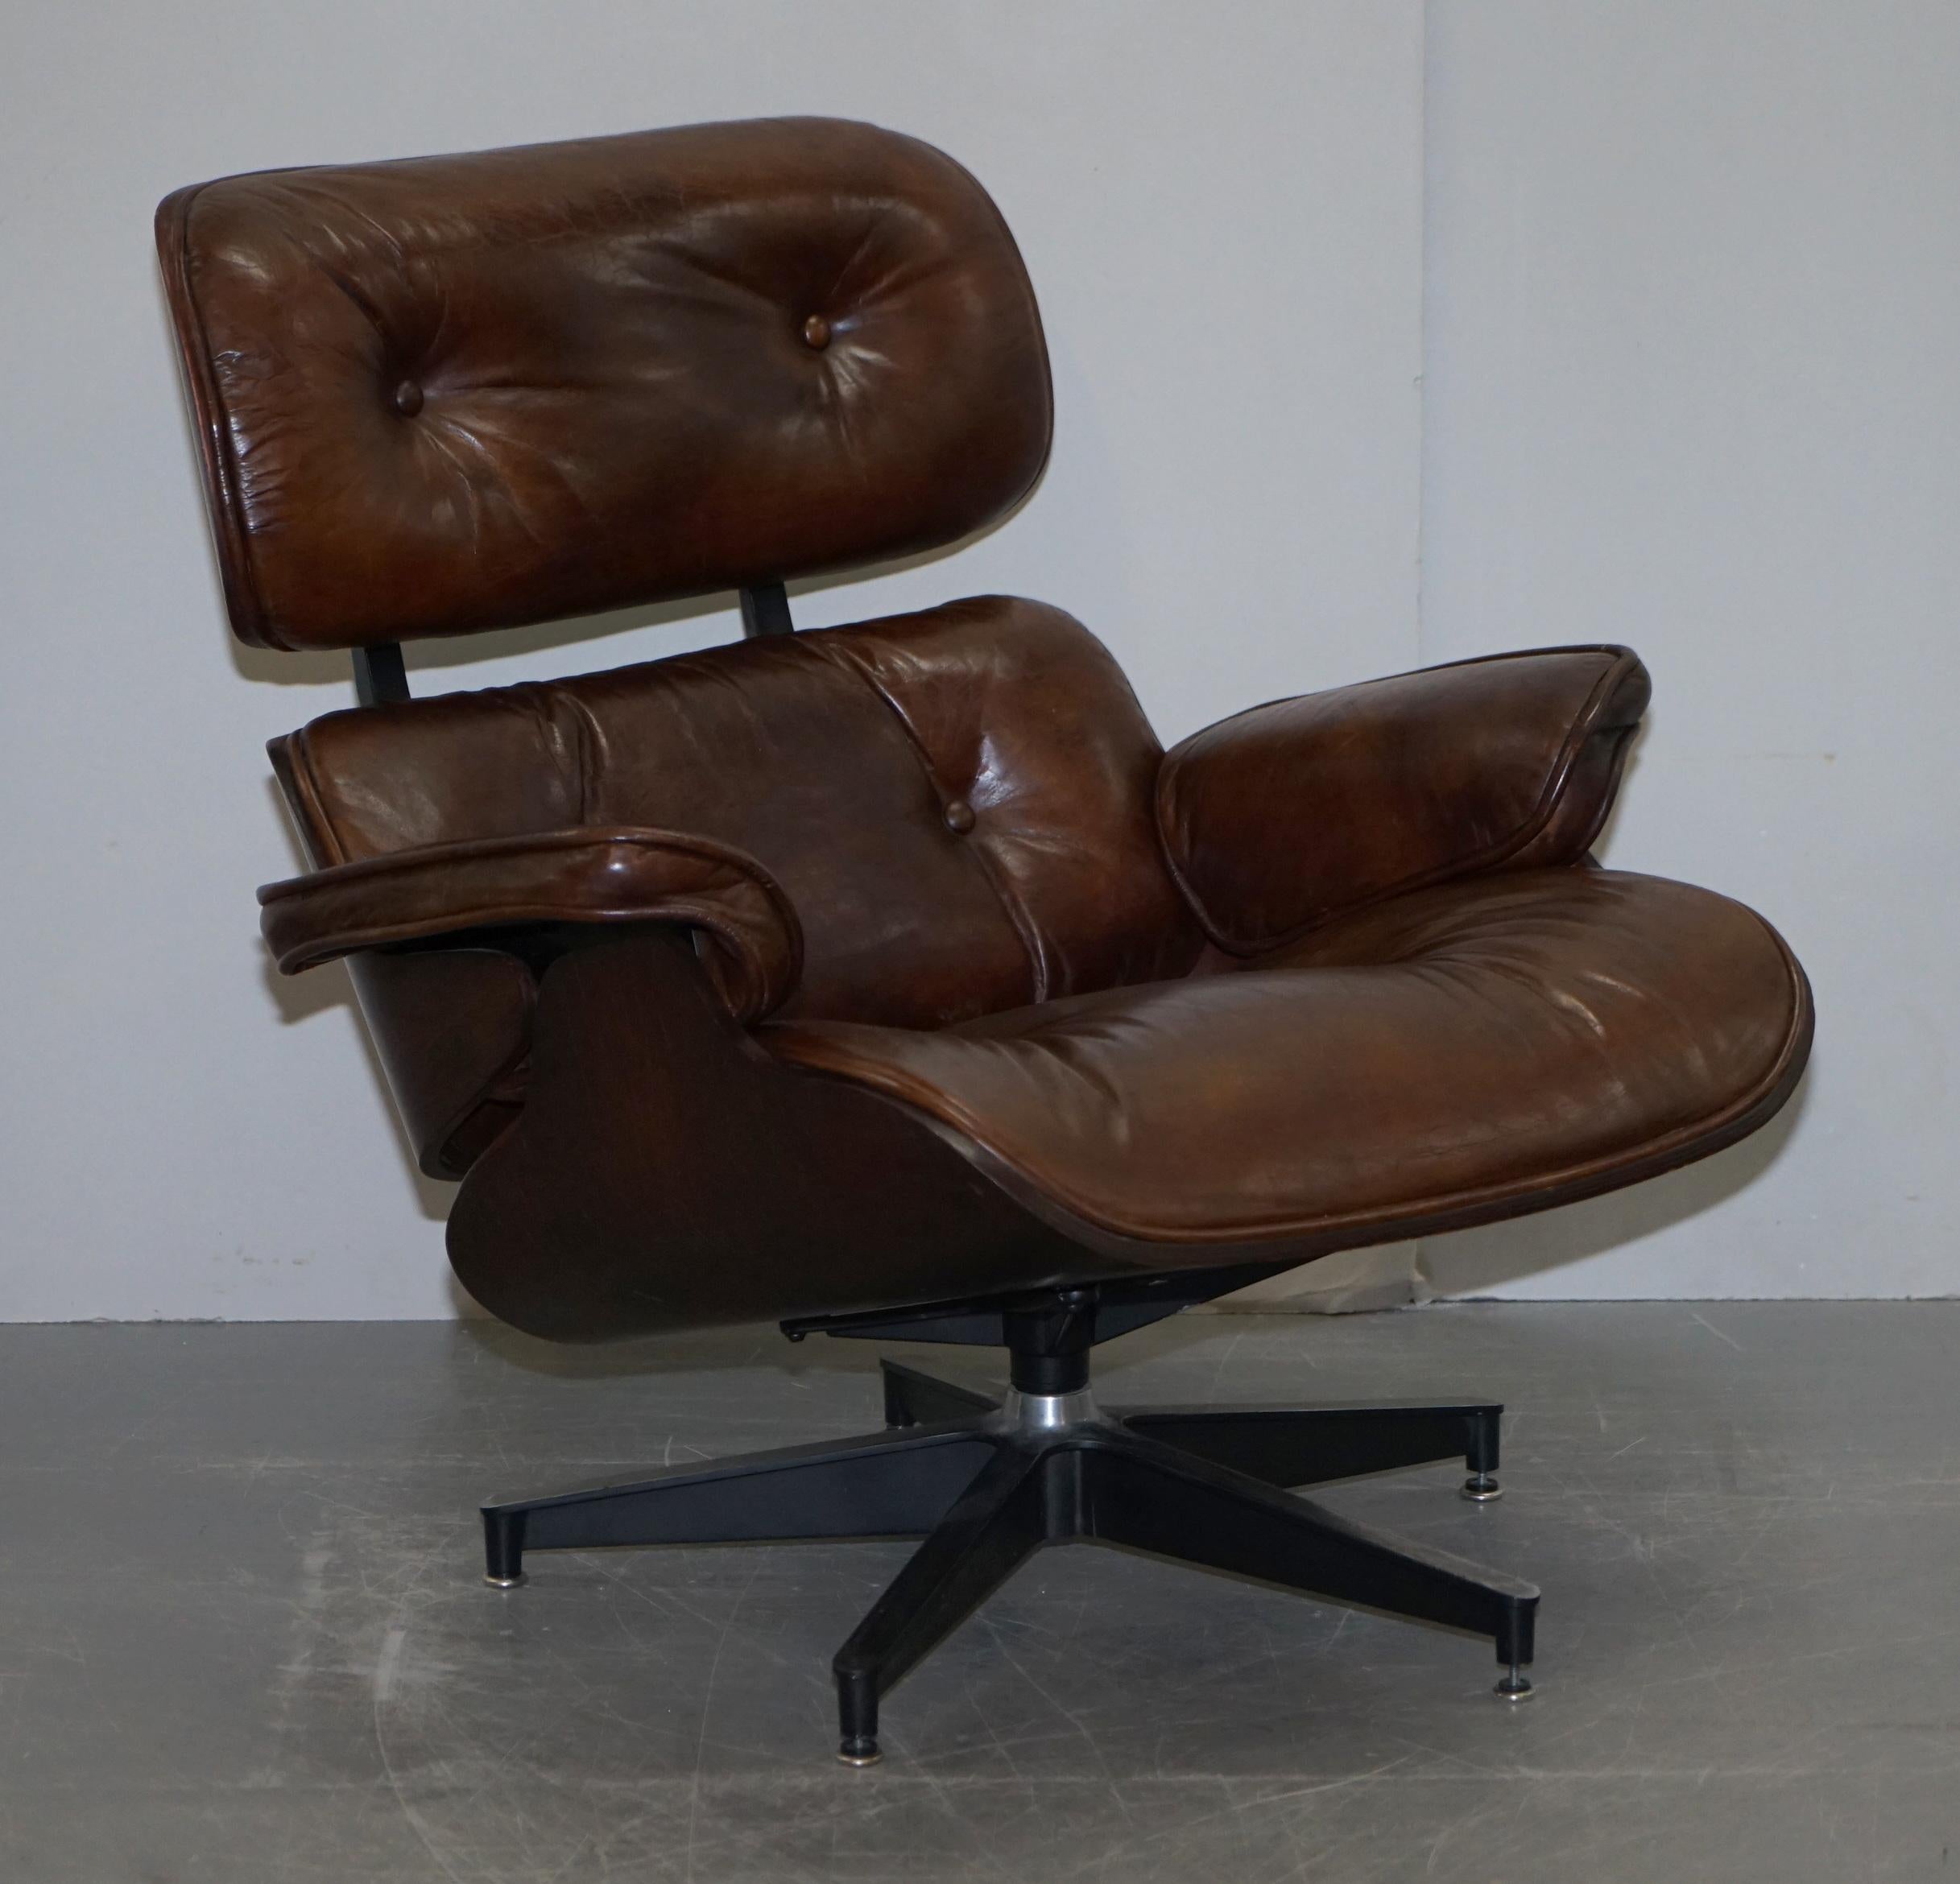 We are delighted to offer for sale this very fine and extremely comfortable heritage aged brown vintage leather lounge armchair and matching ottoman

A very good looking decorative and comfortable pair that would look cool and stylish in any